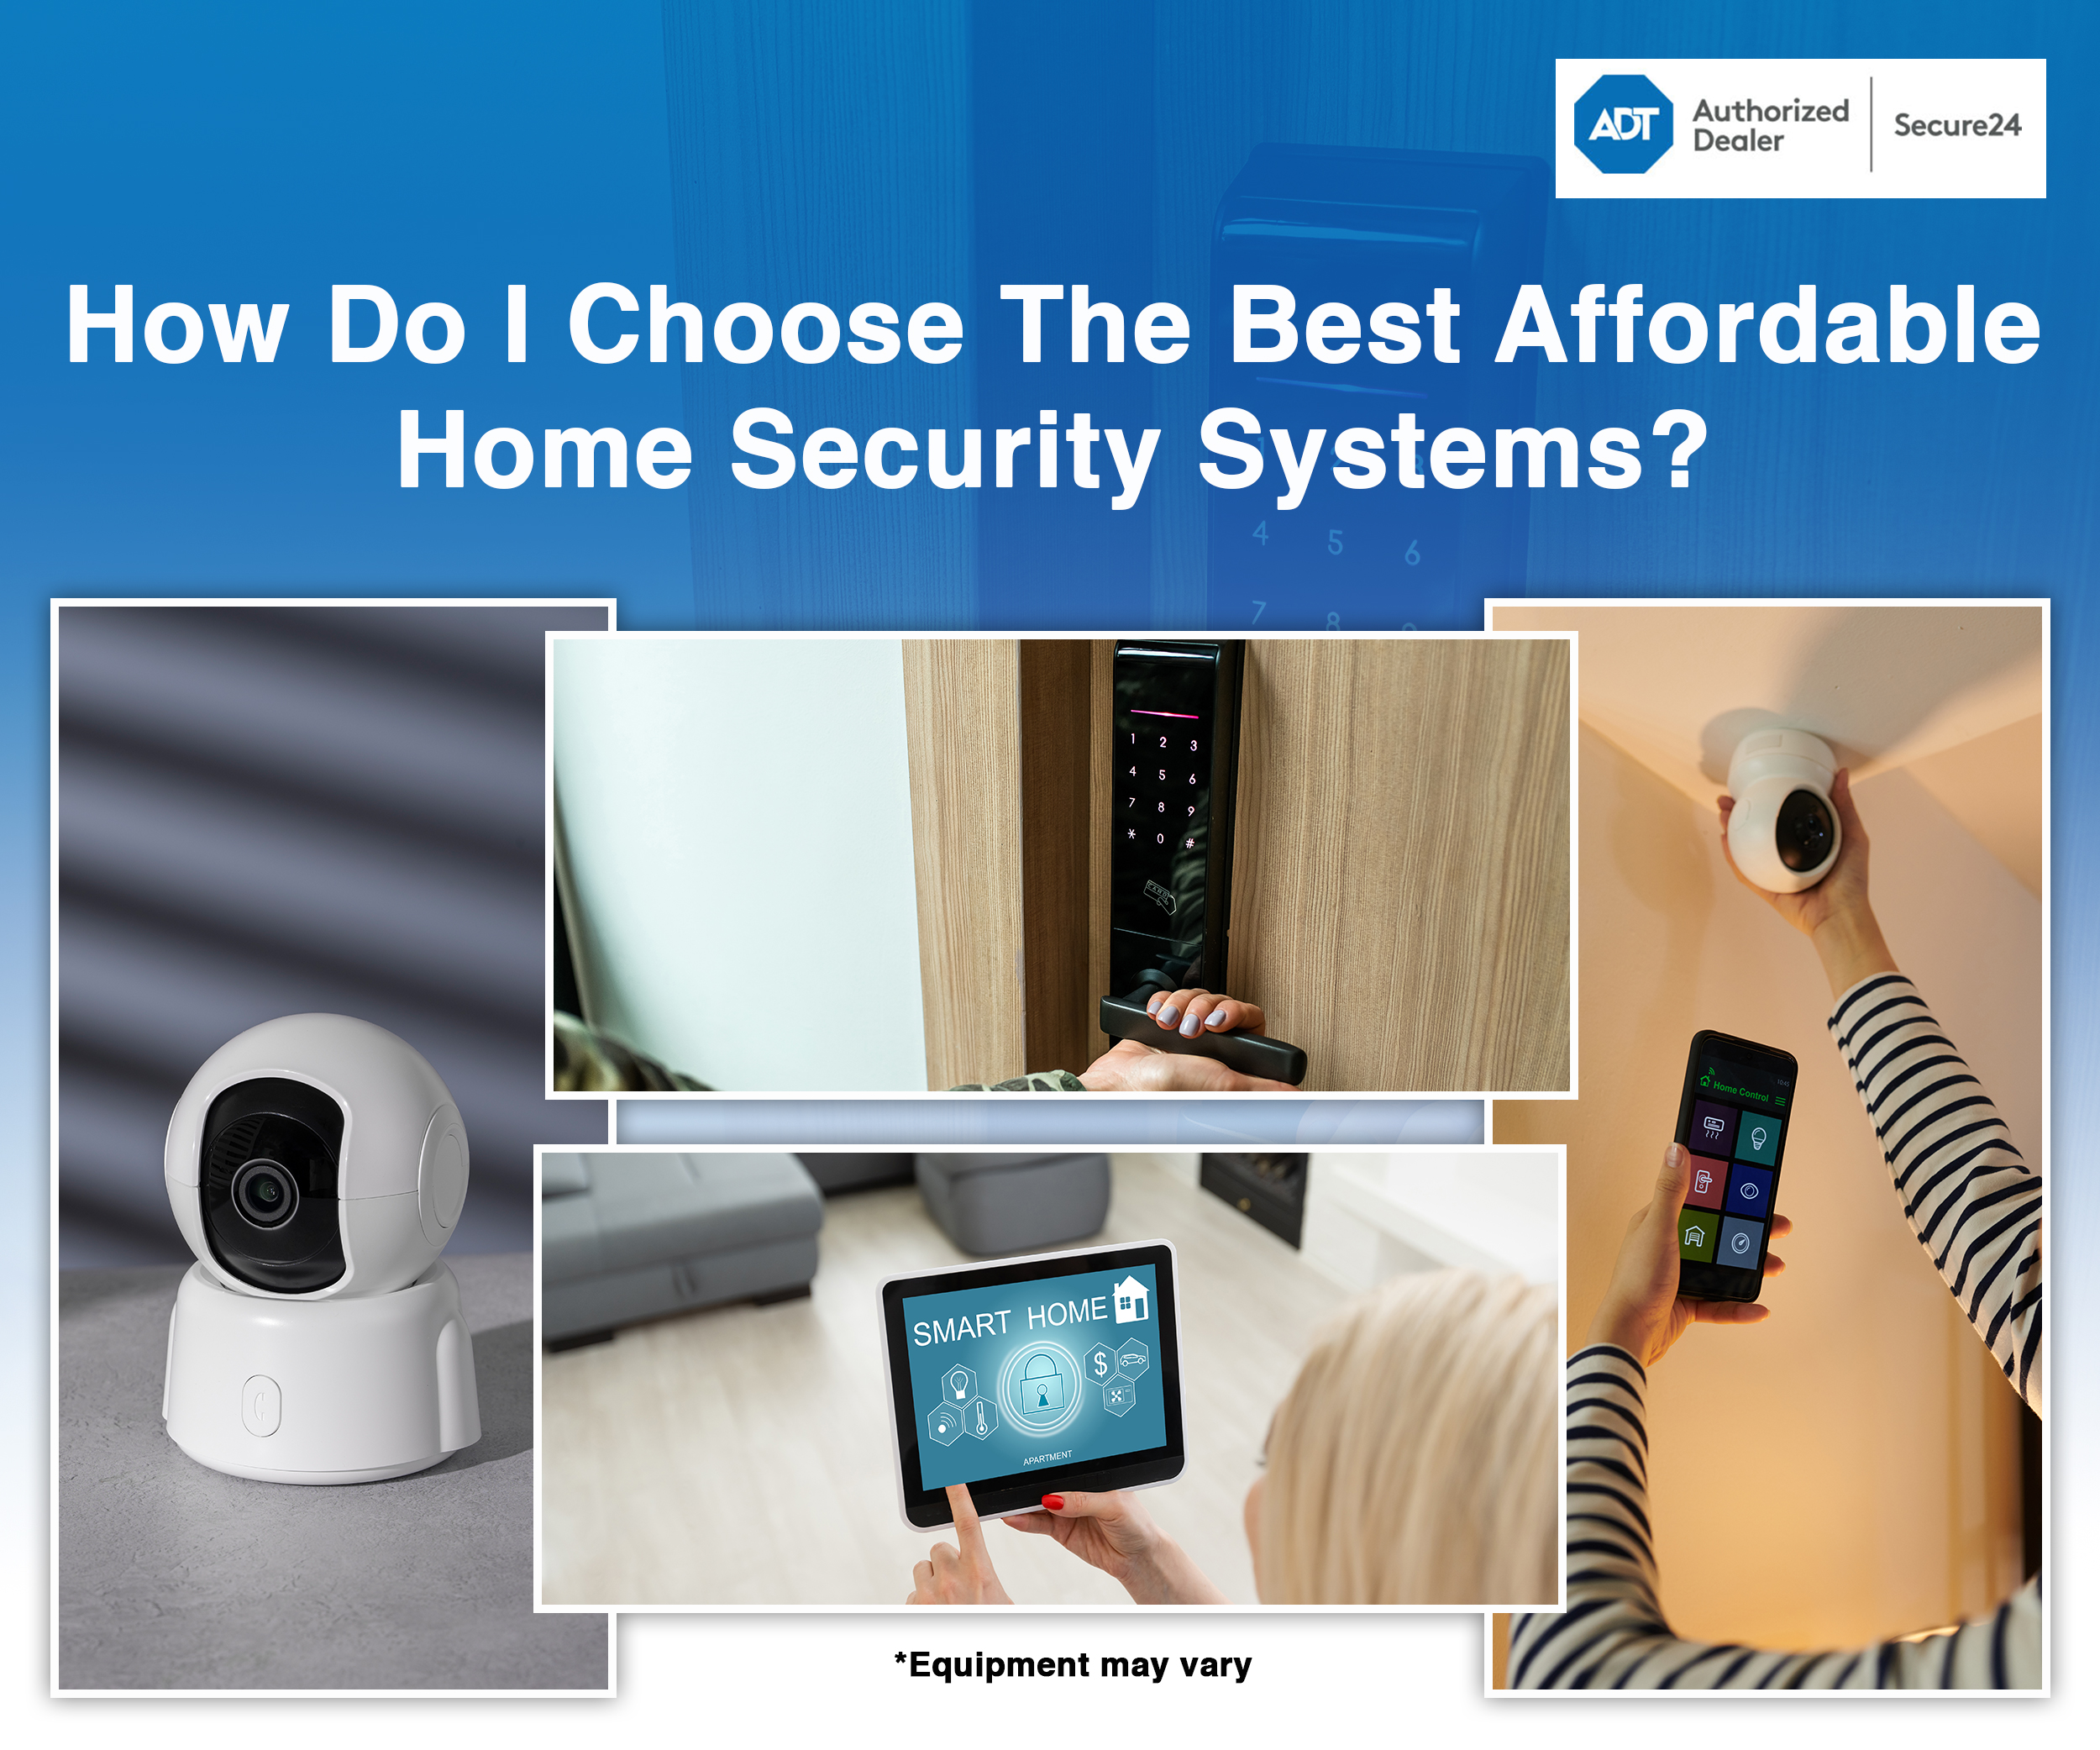 Best Affordable Home Security Systems